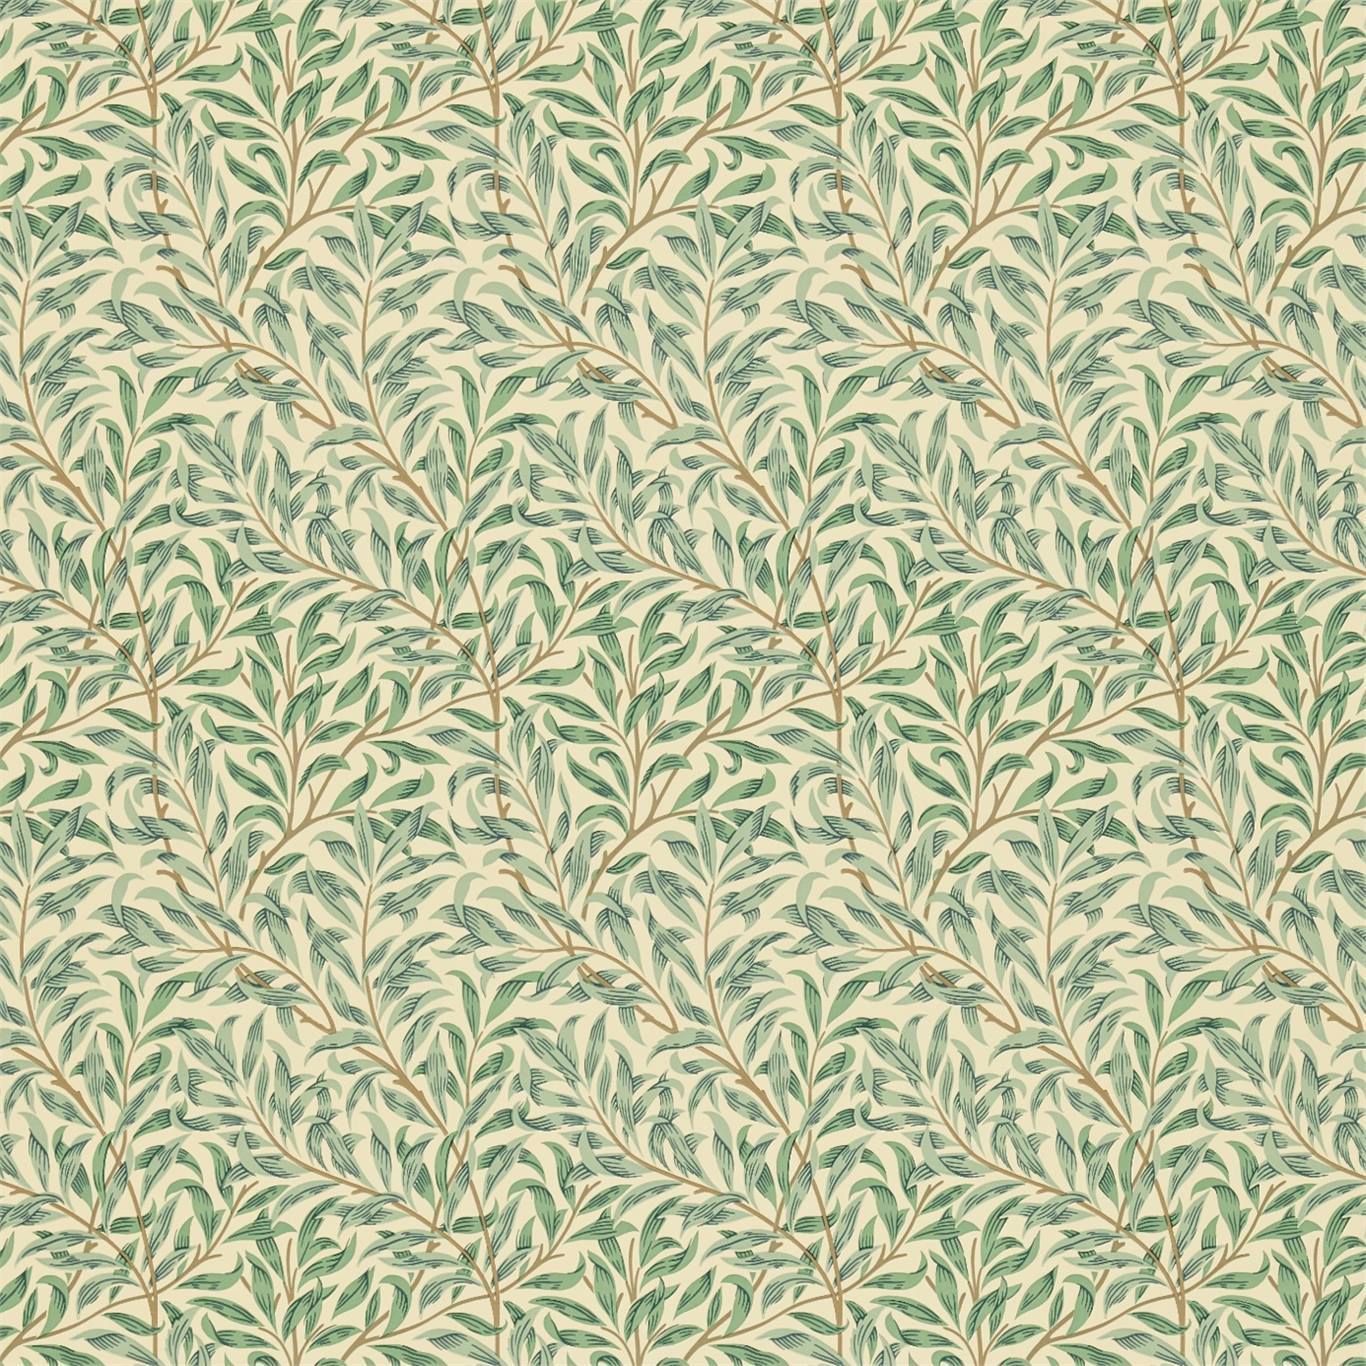 Willow Bough Minor Wallpaper DCMW216814 by Morris & Co